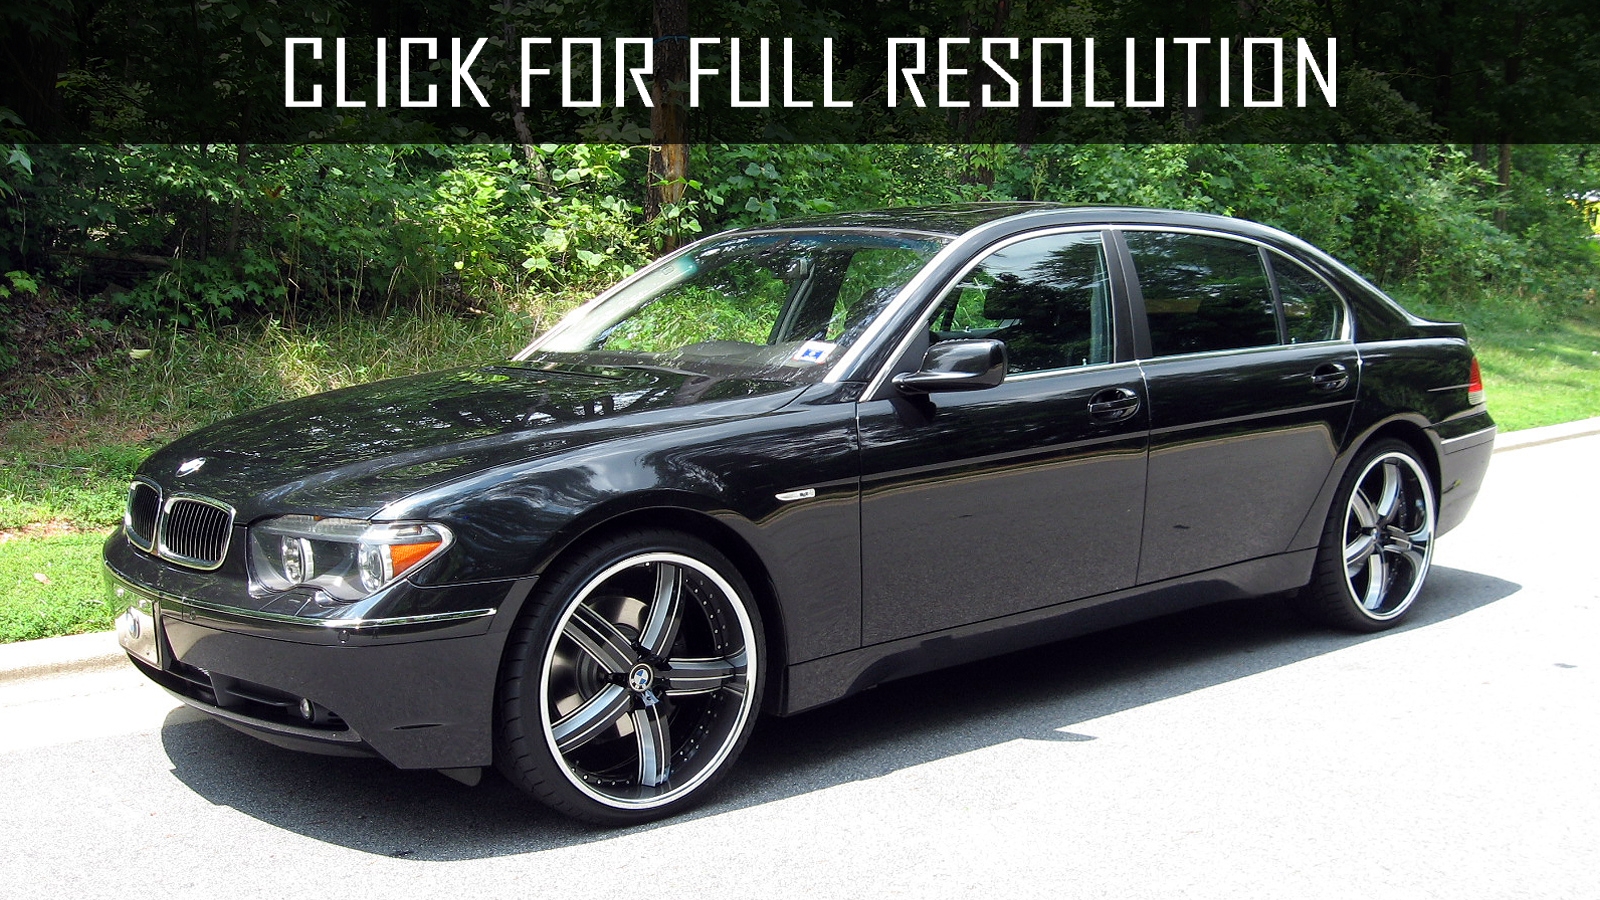 Bmw 745 amazing photo gallery, some information and specifications